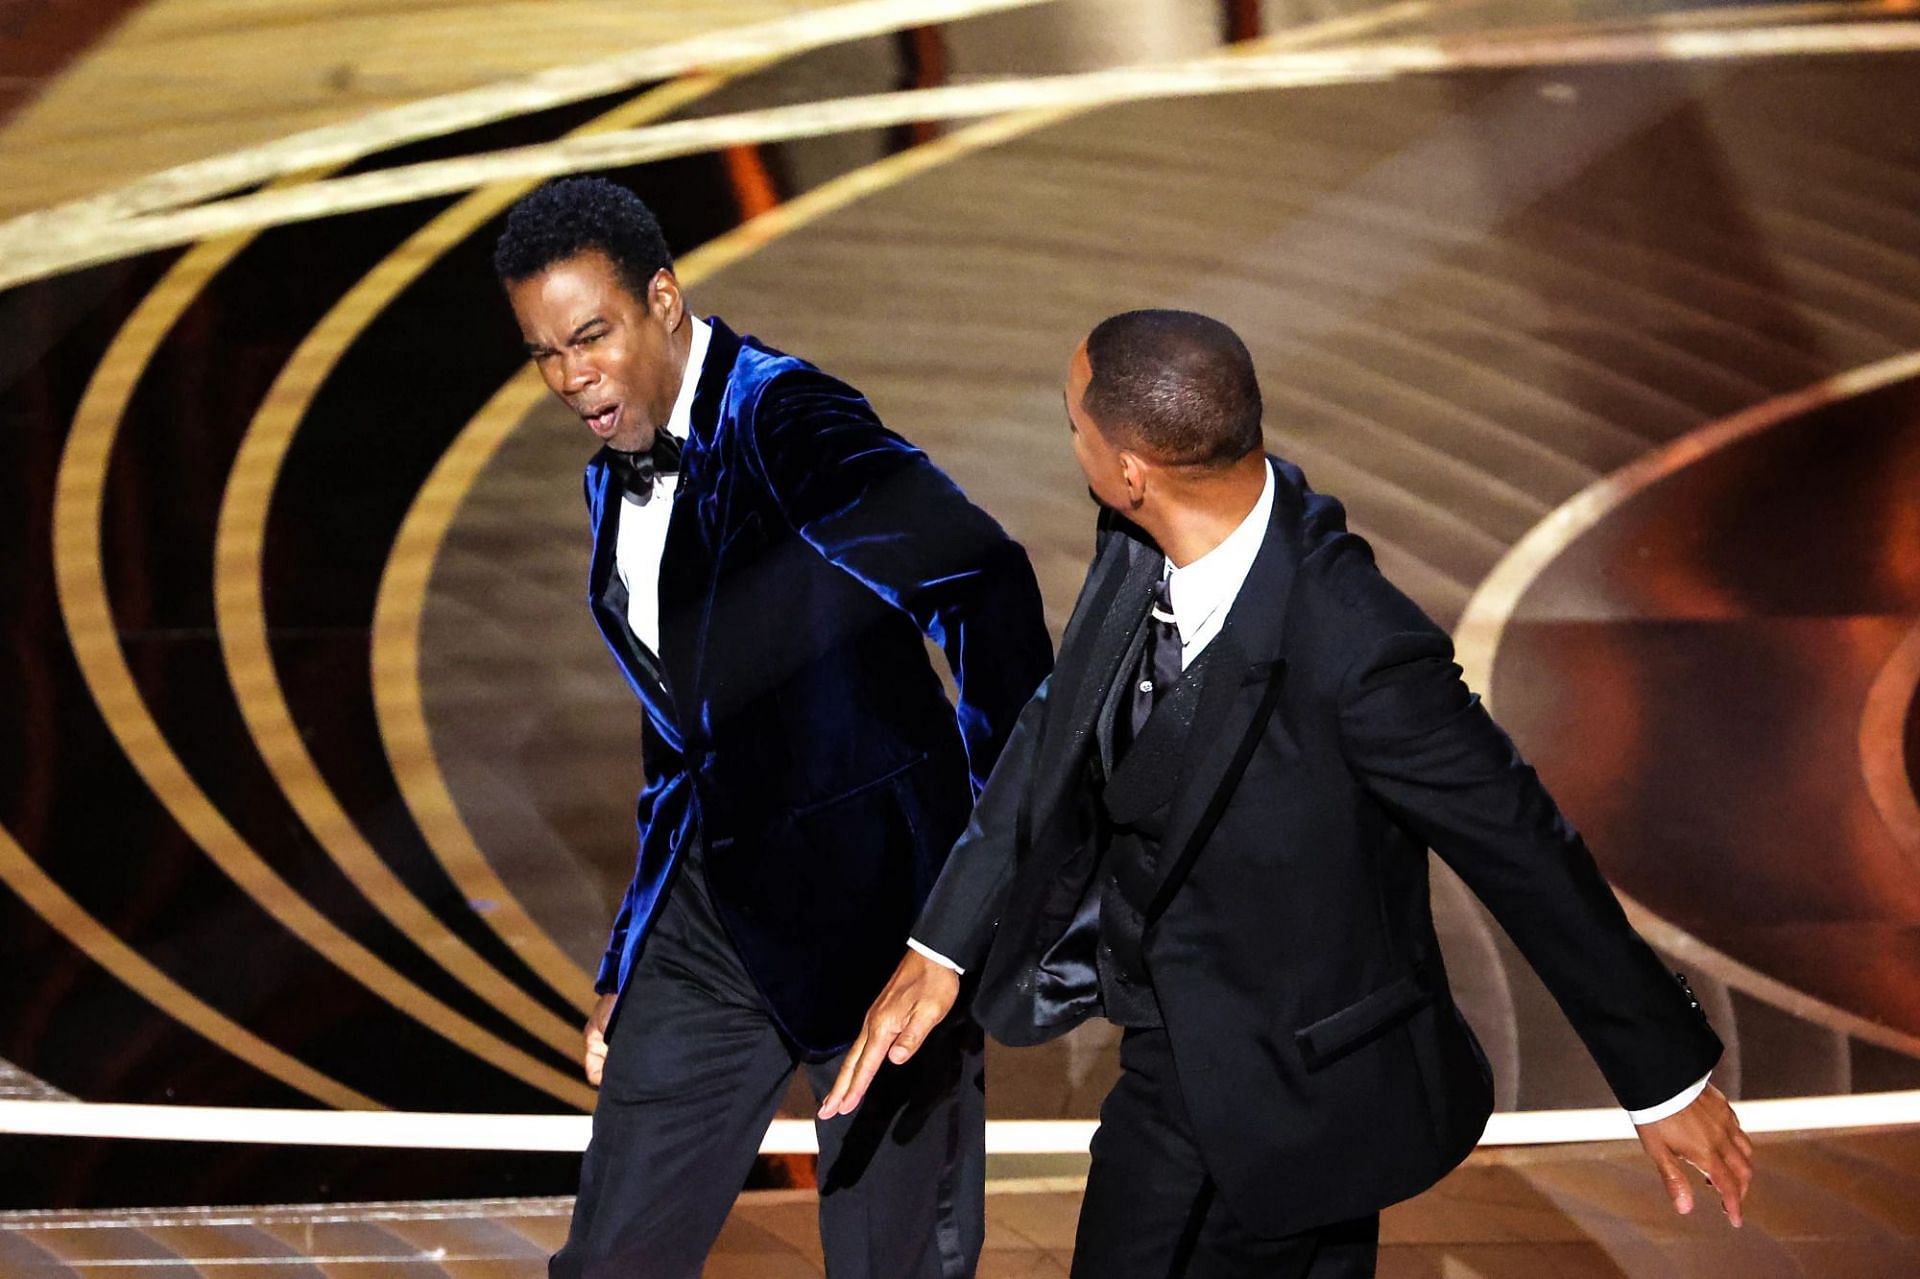 Will Smith slaps Chris Rock onstage during the 94th Academy Awards at the Dolby Theatre(Myung Chun / Los Angeles Times)